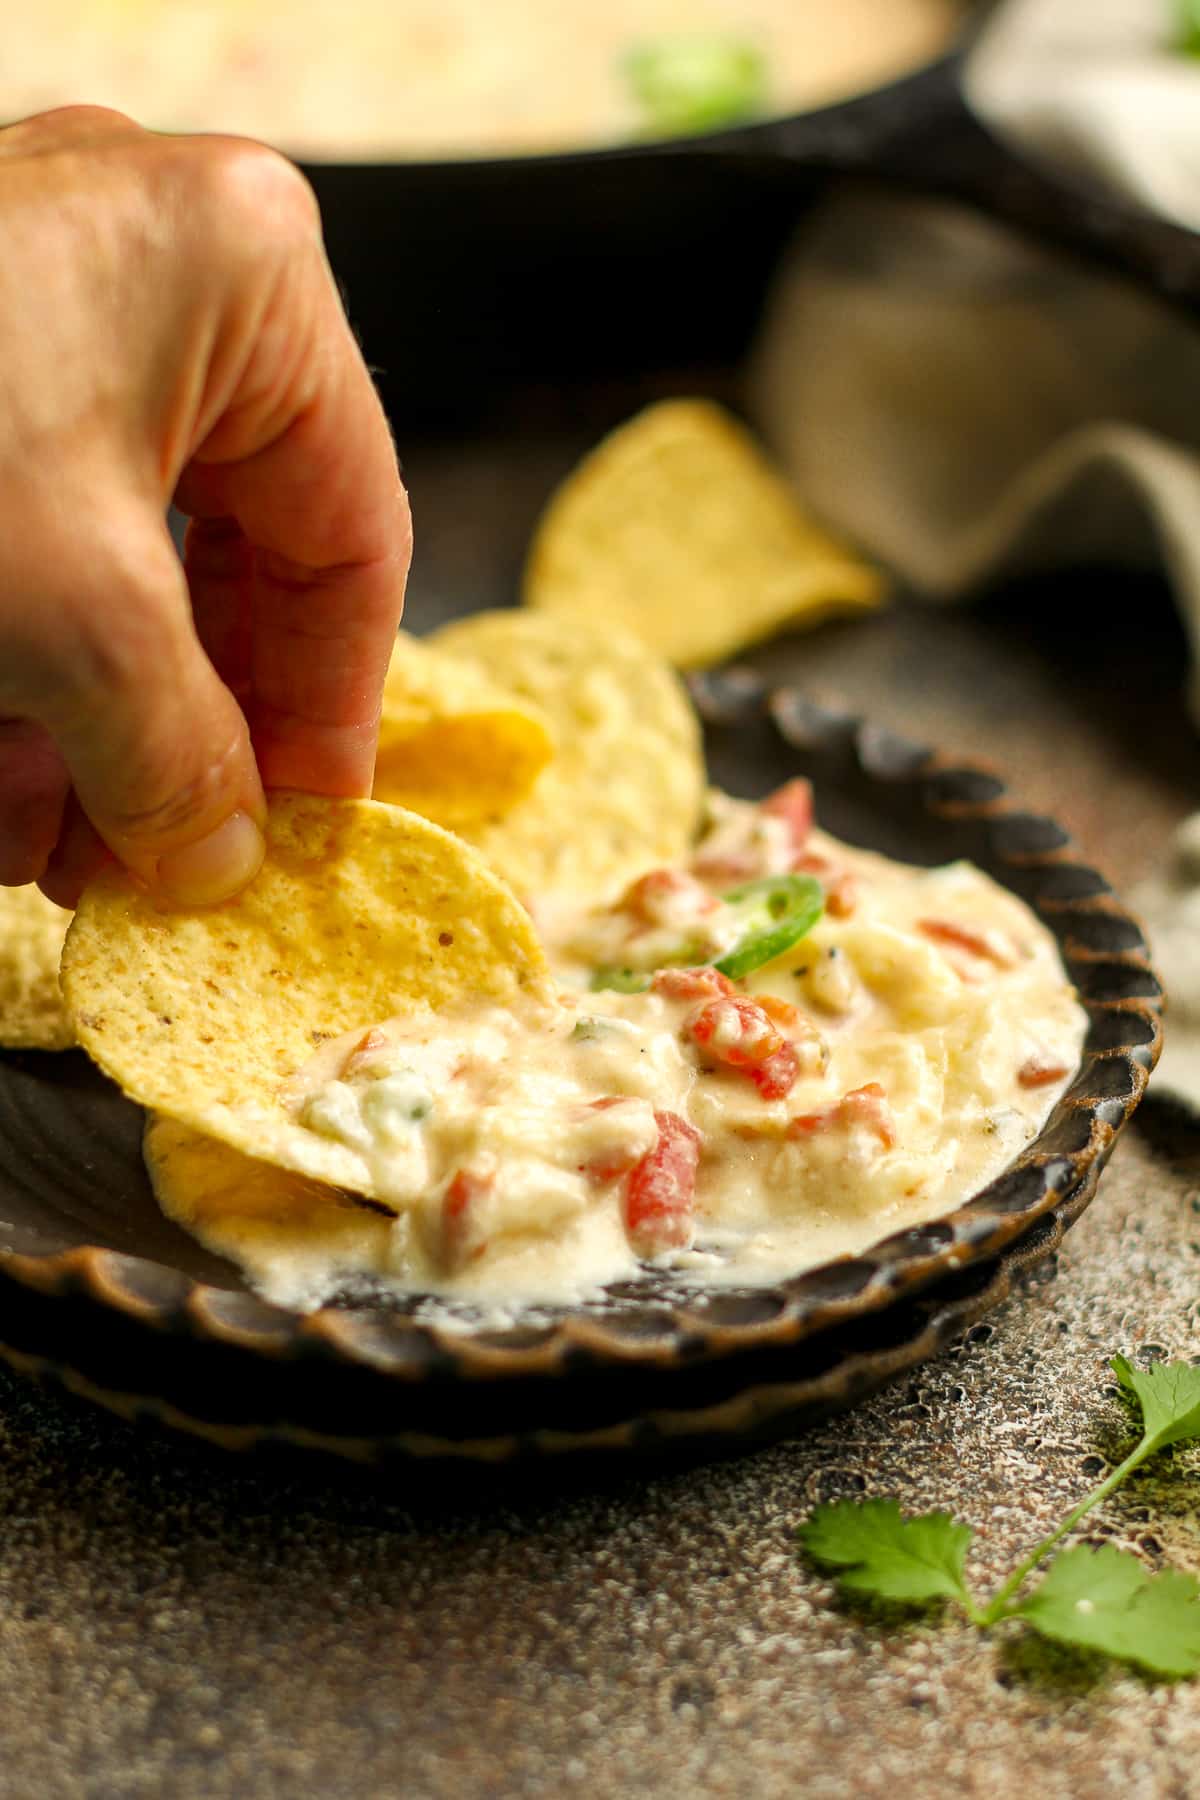 A hand dipping a chip into a small plate with queso and chips.